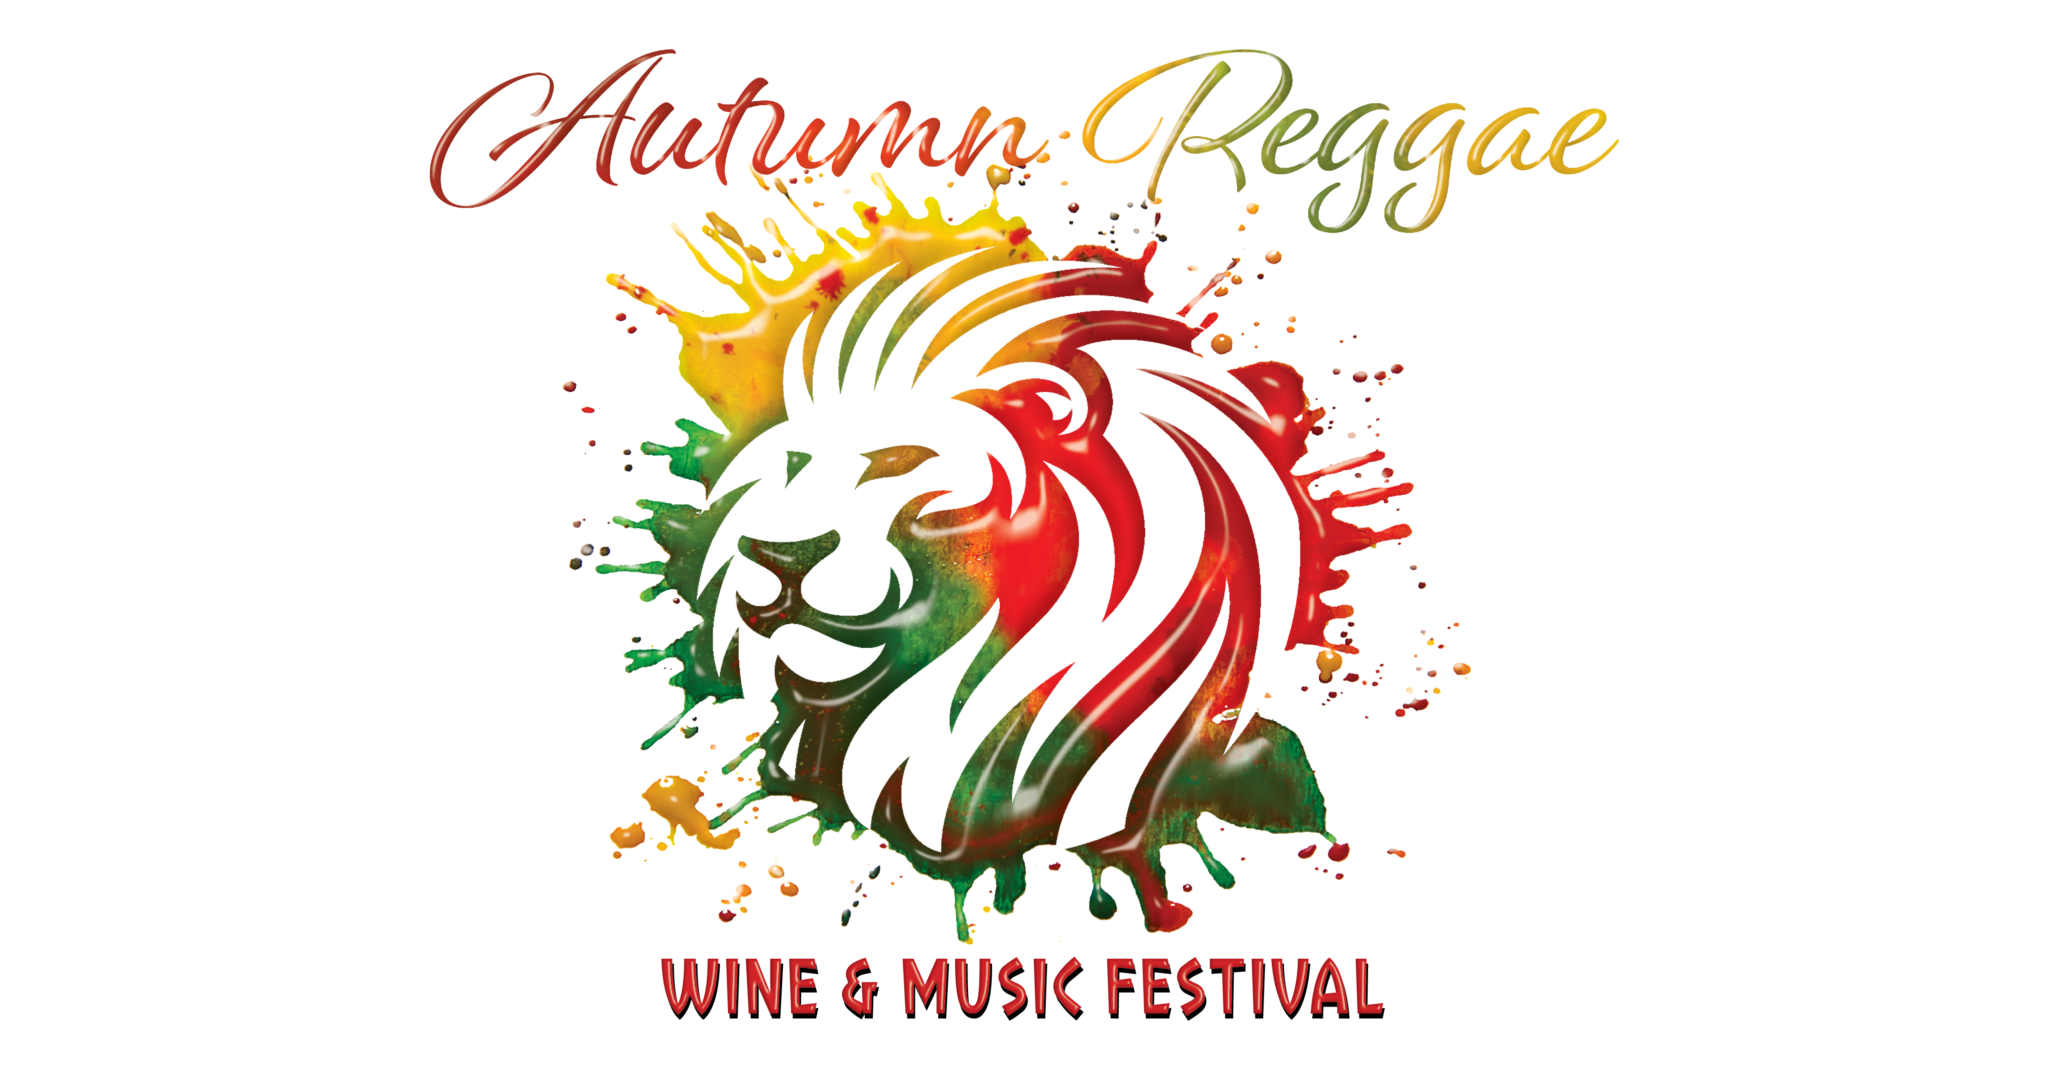 All events for Autumn Reggae Wine & Music Festival Linganore Wines